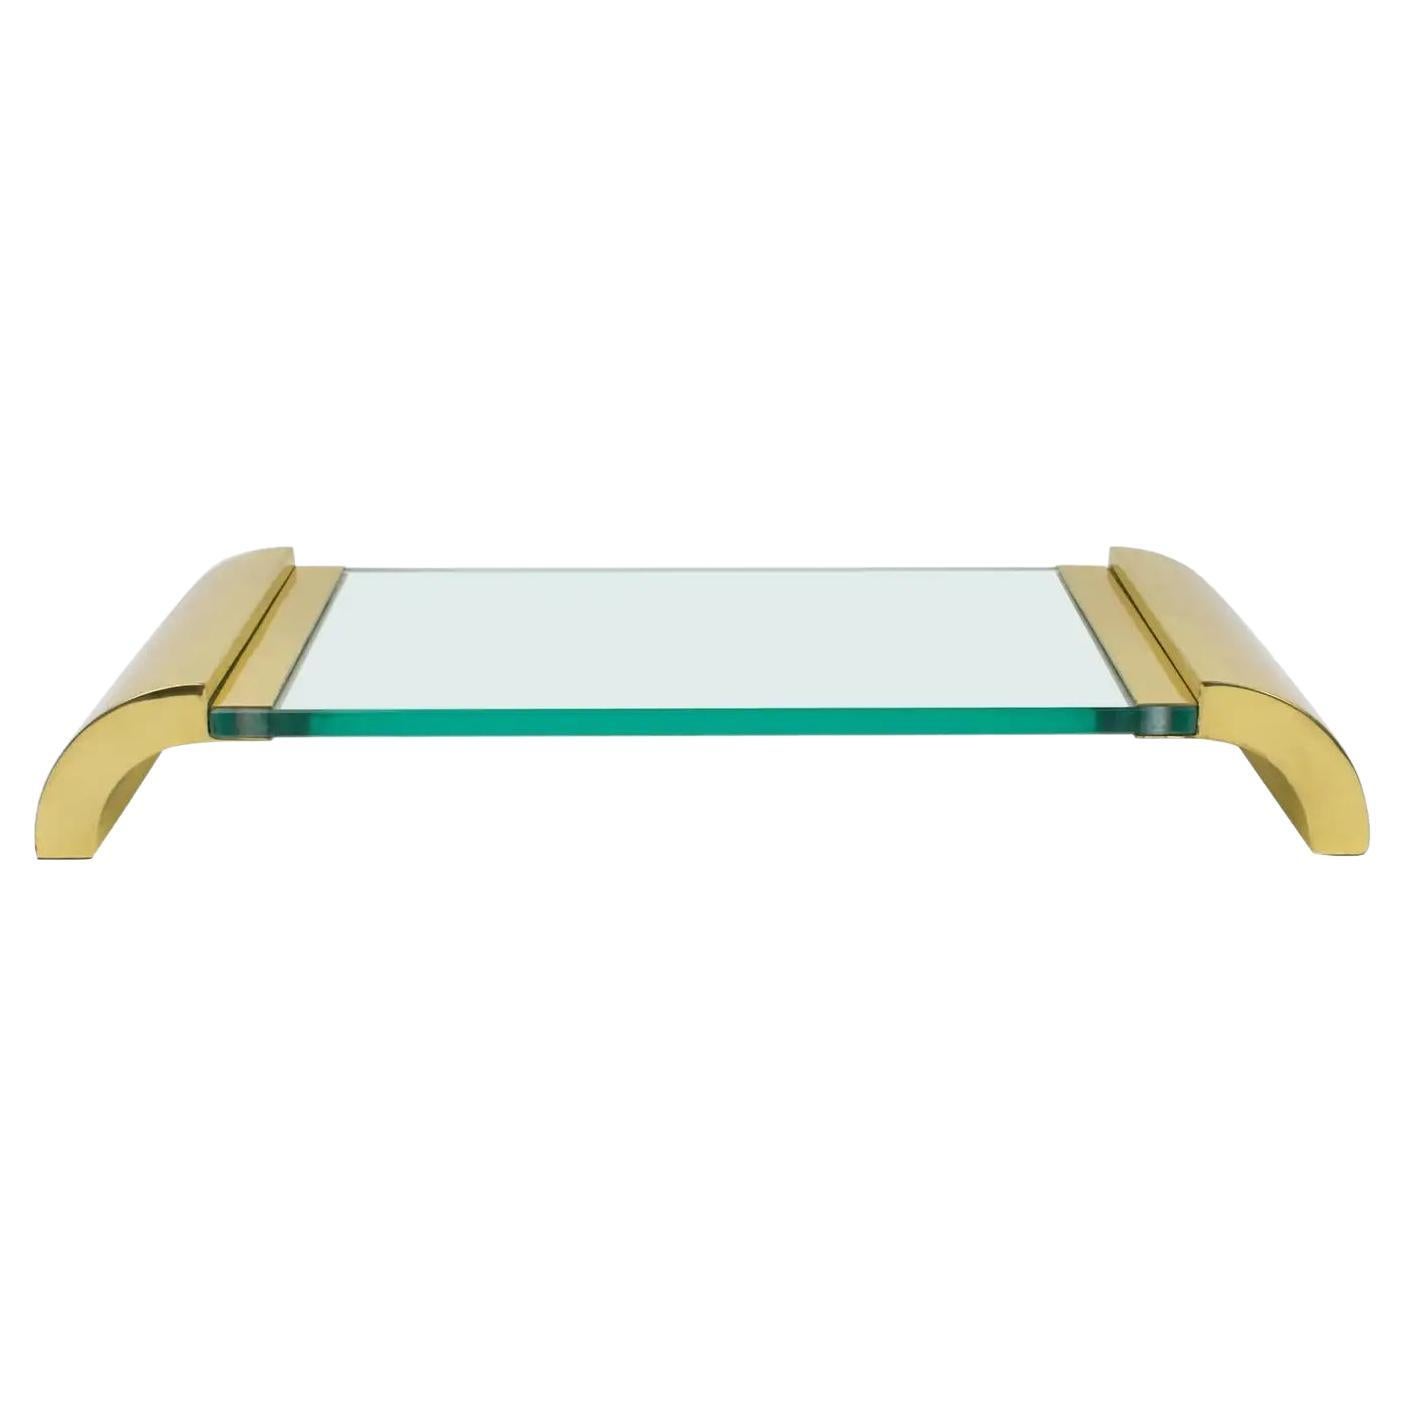 Modernist Brass and Glass Pedestal Centerpiece Display Tray, Italy 1980s For Sale